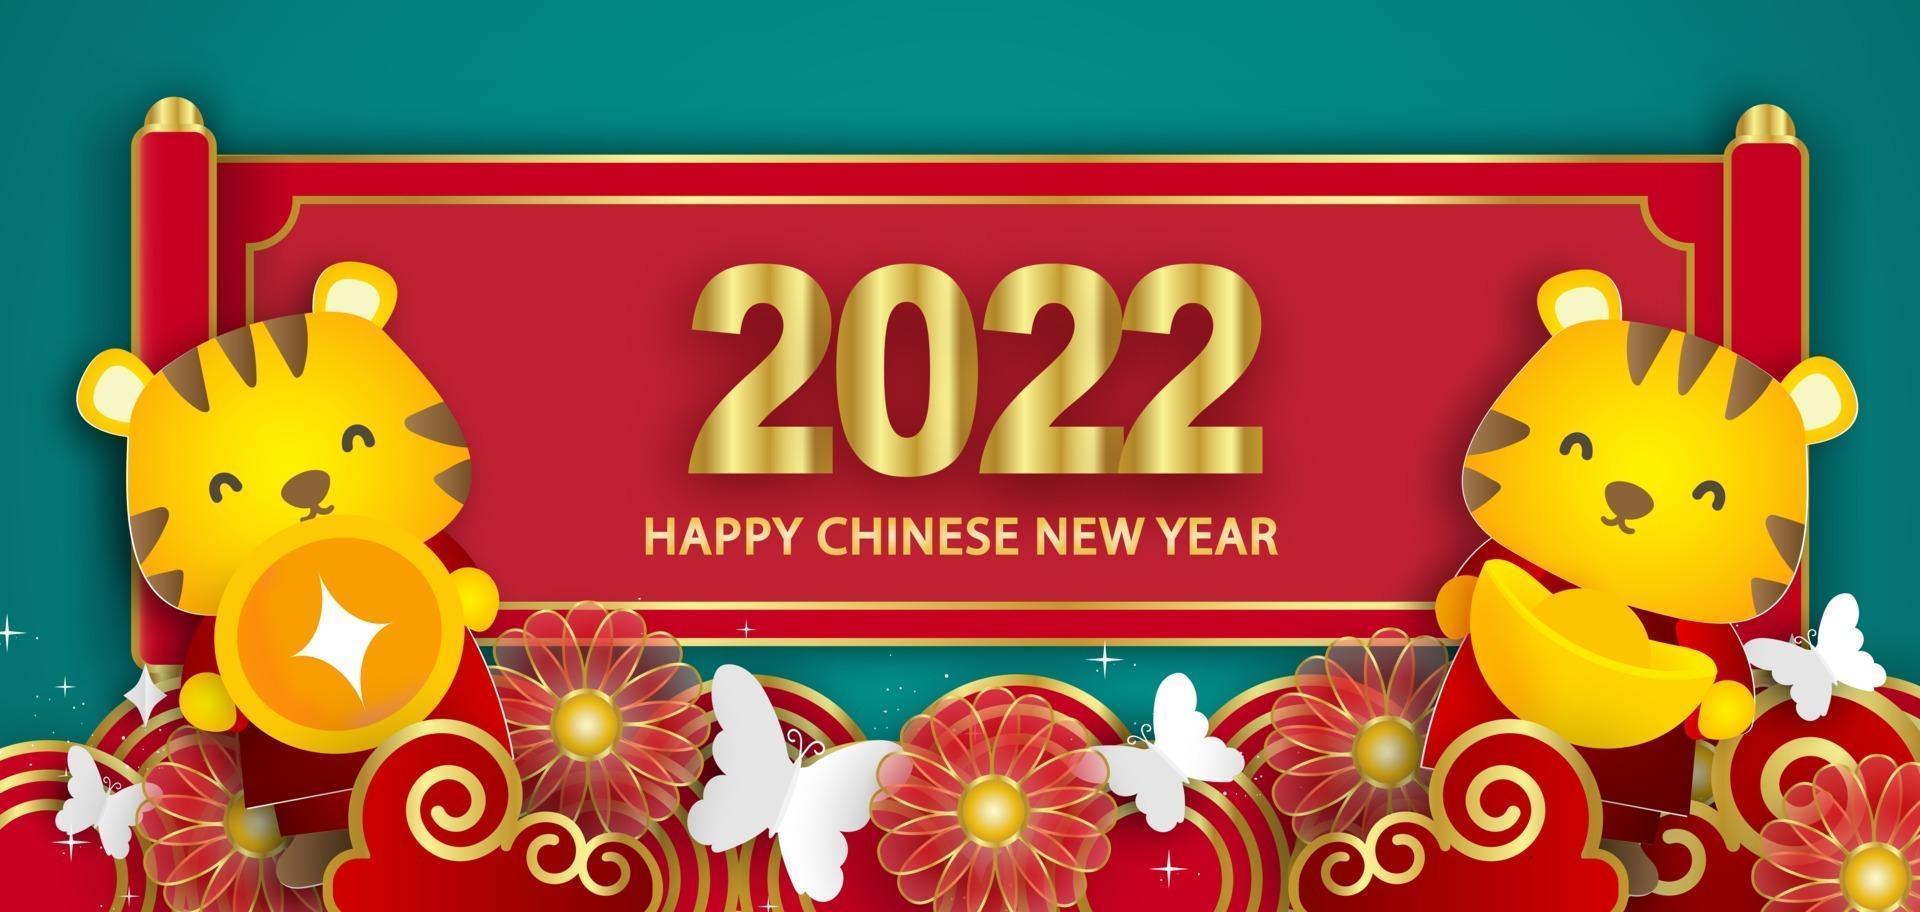 Chinese new year 2022 year of the tiger banner